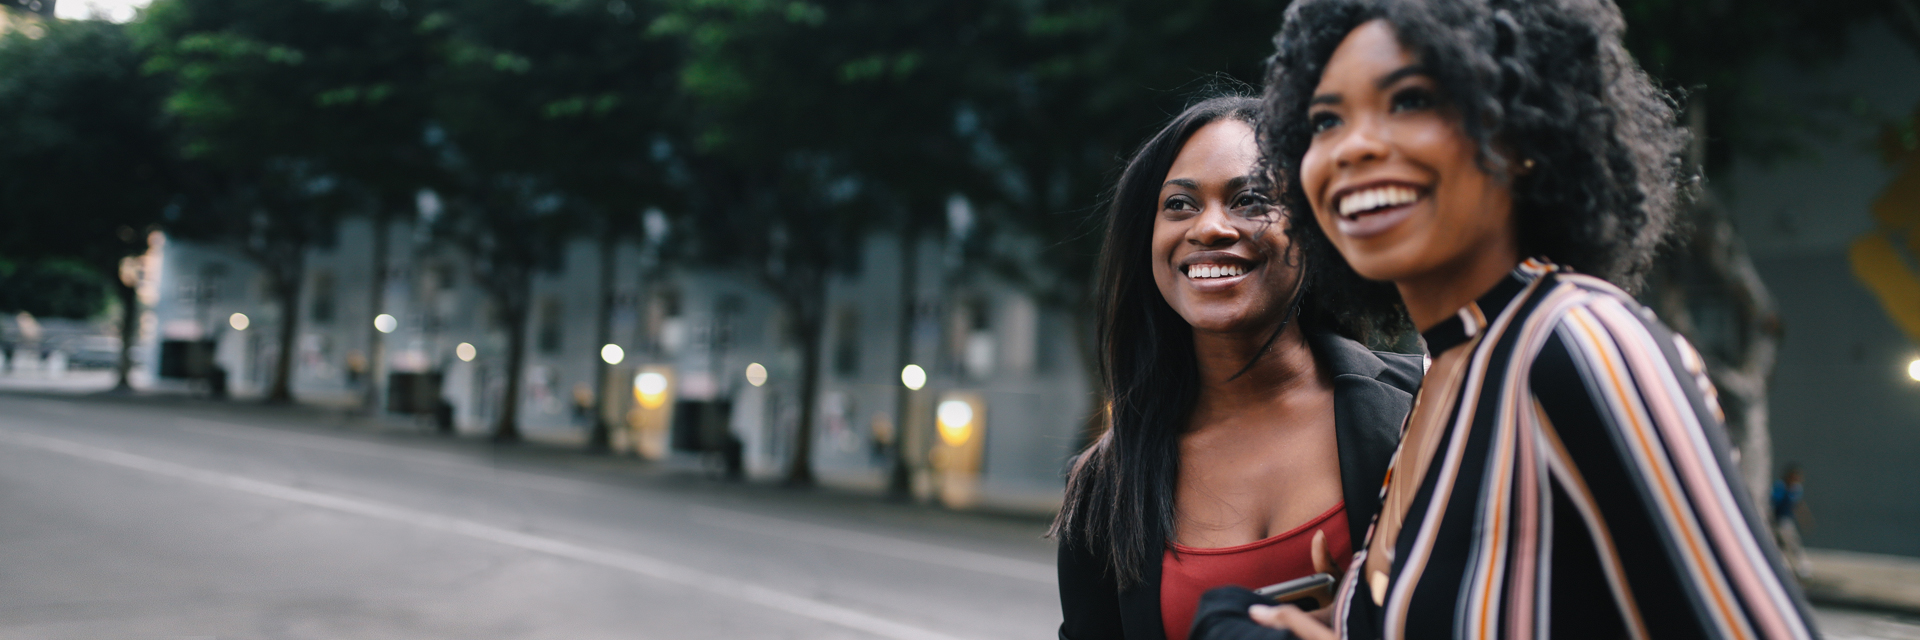 Two smiling black women standing on a street.